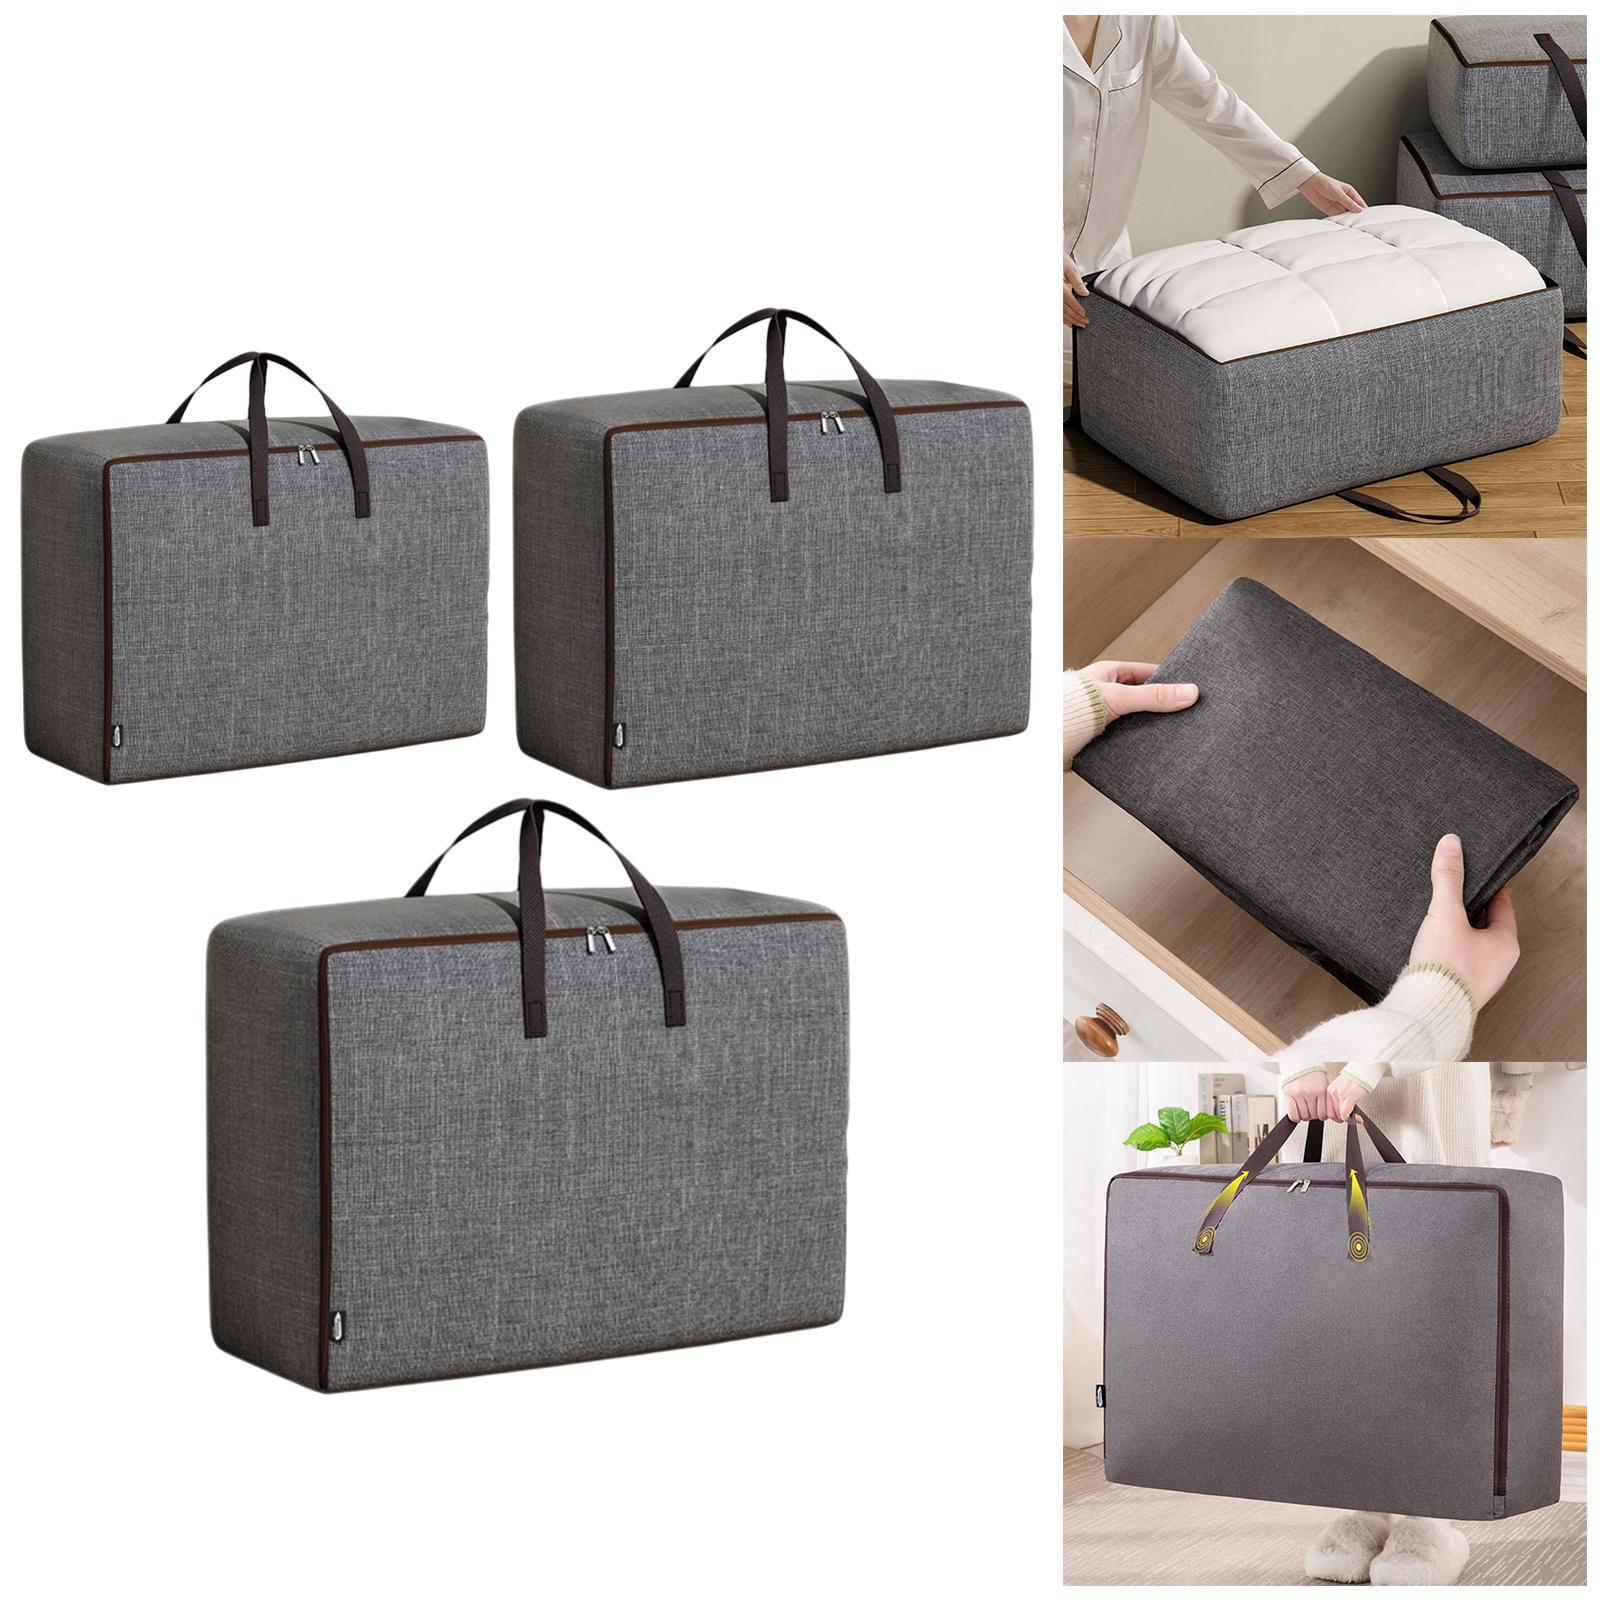 Blanket Clothes Organizer Foldable Storage Cubes for Clothes Sweater Bedroom